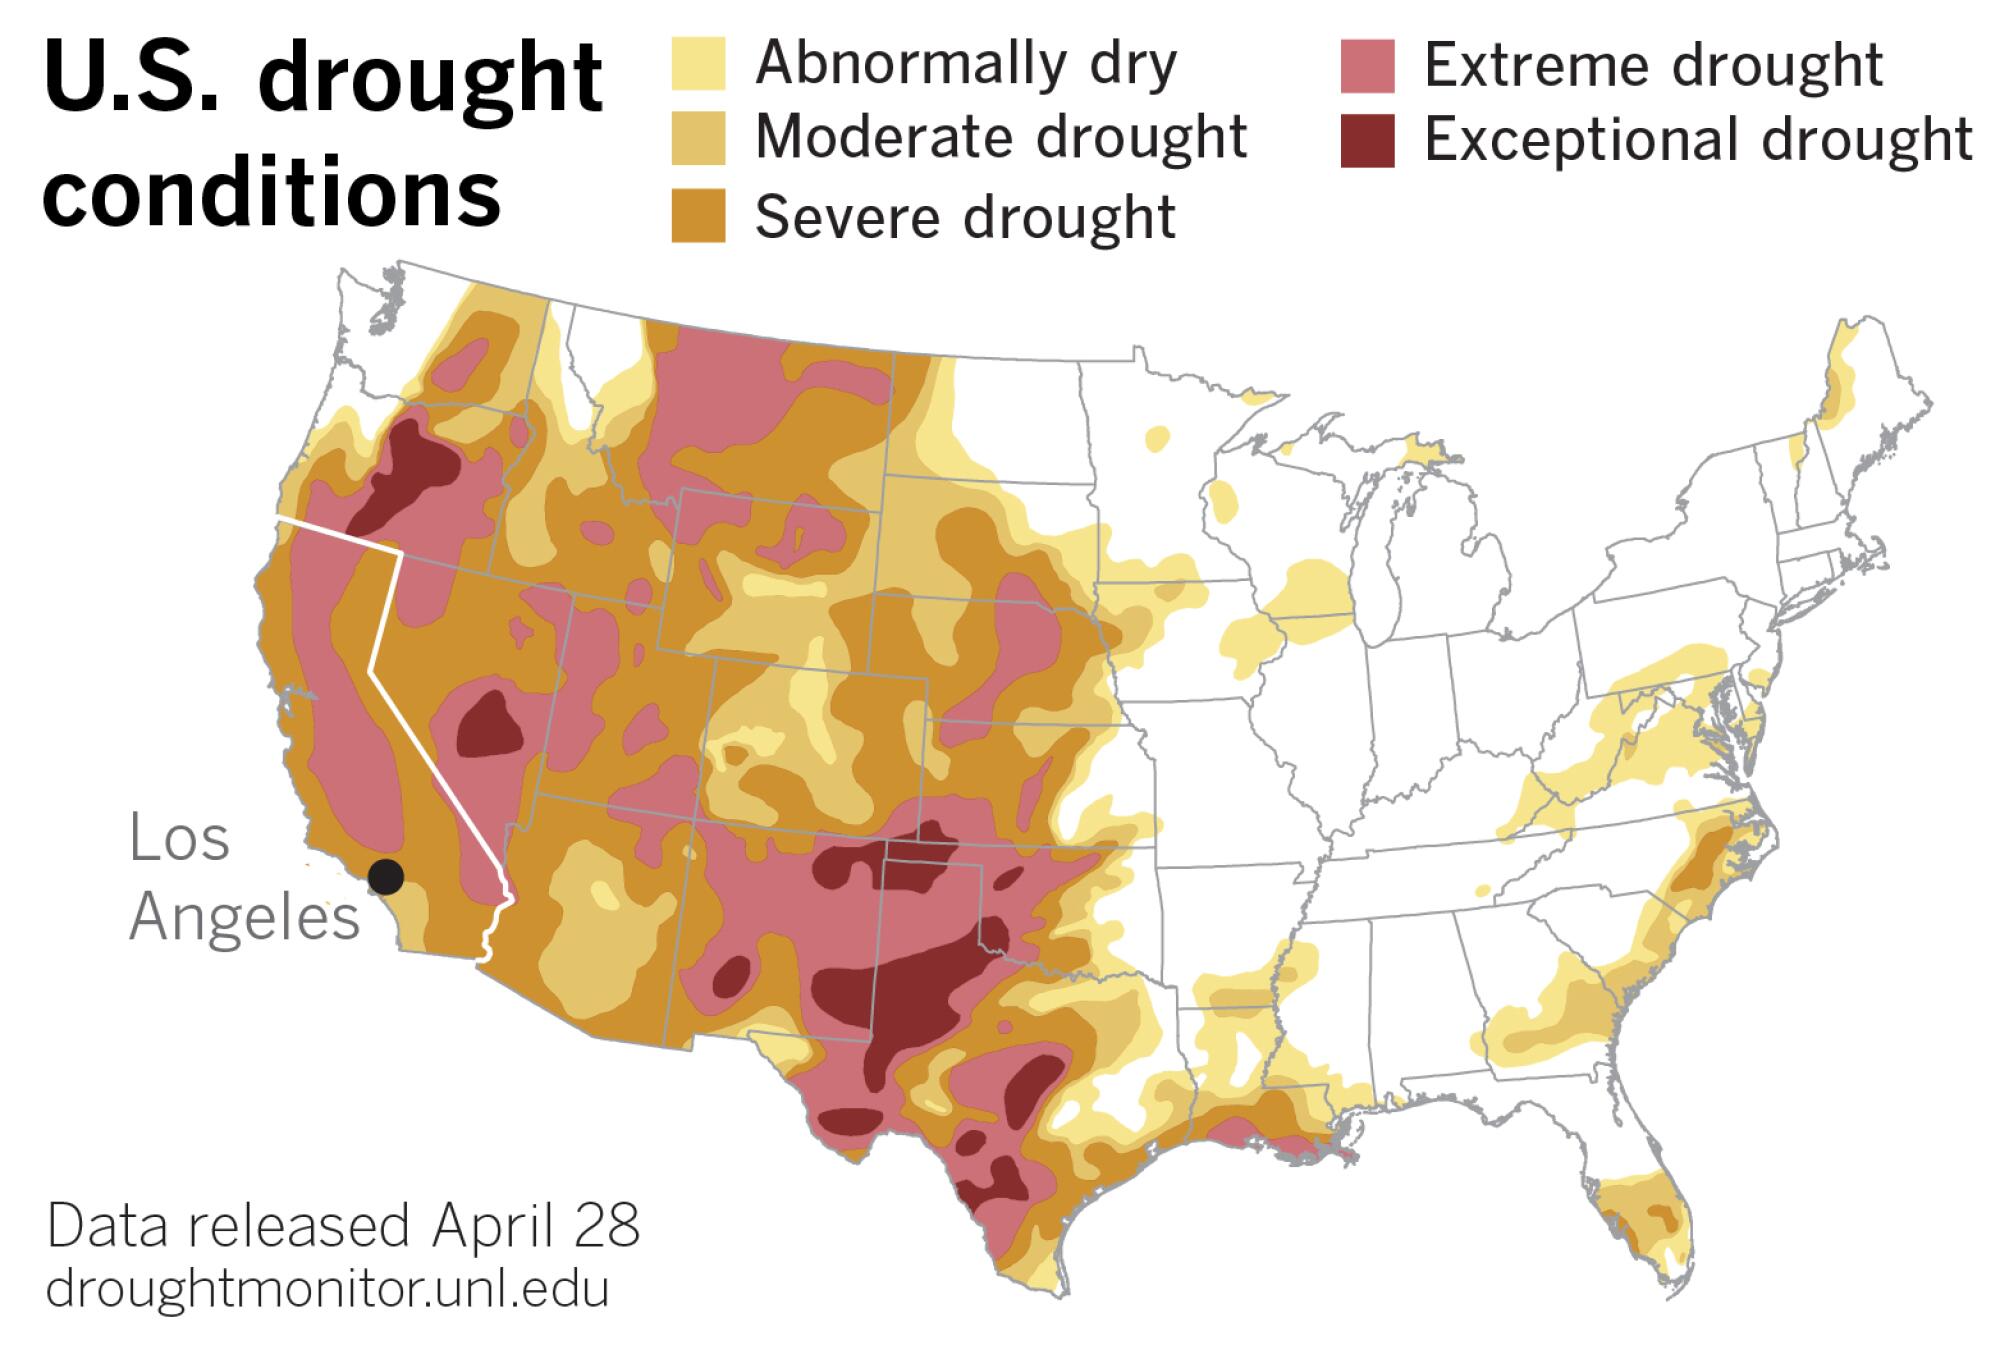 U.S. Drought Monitor released April 28.